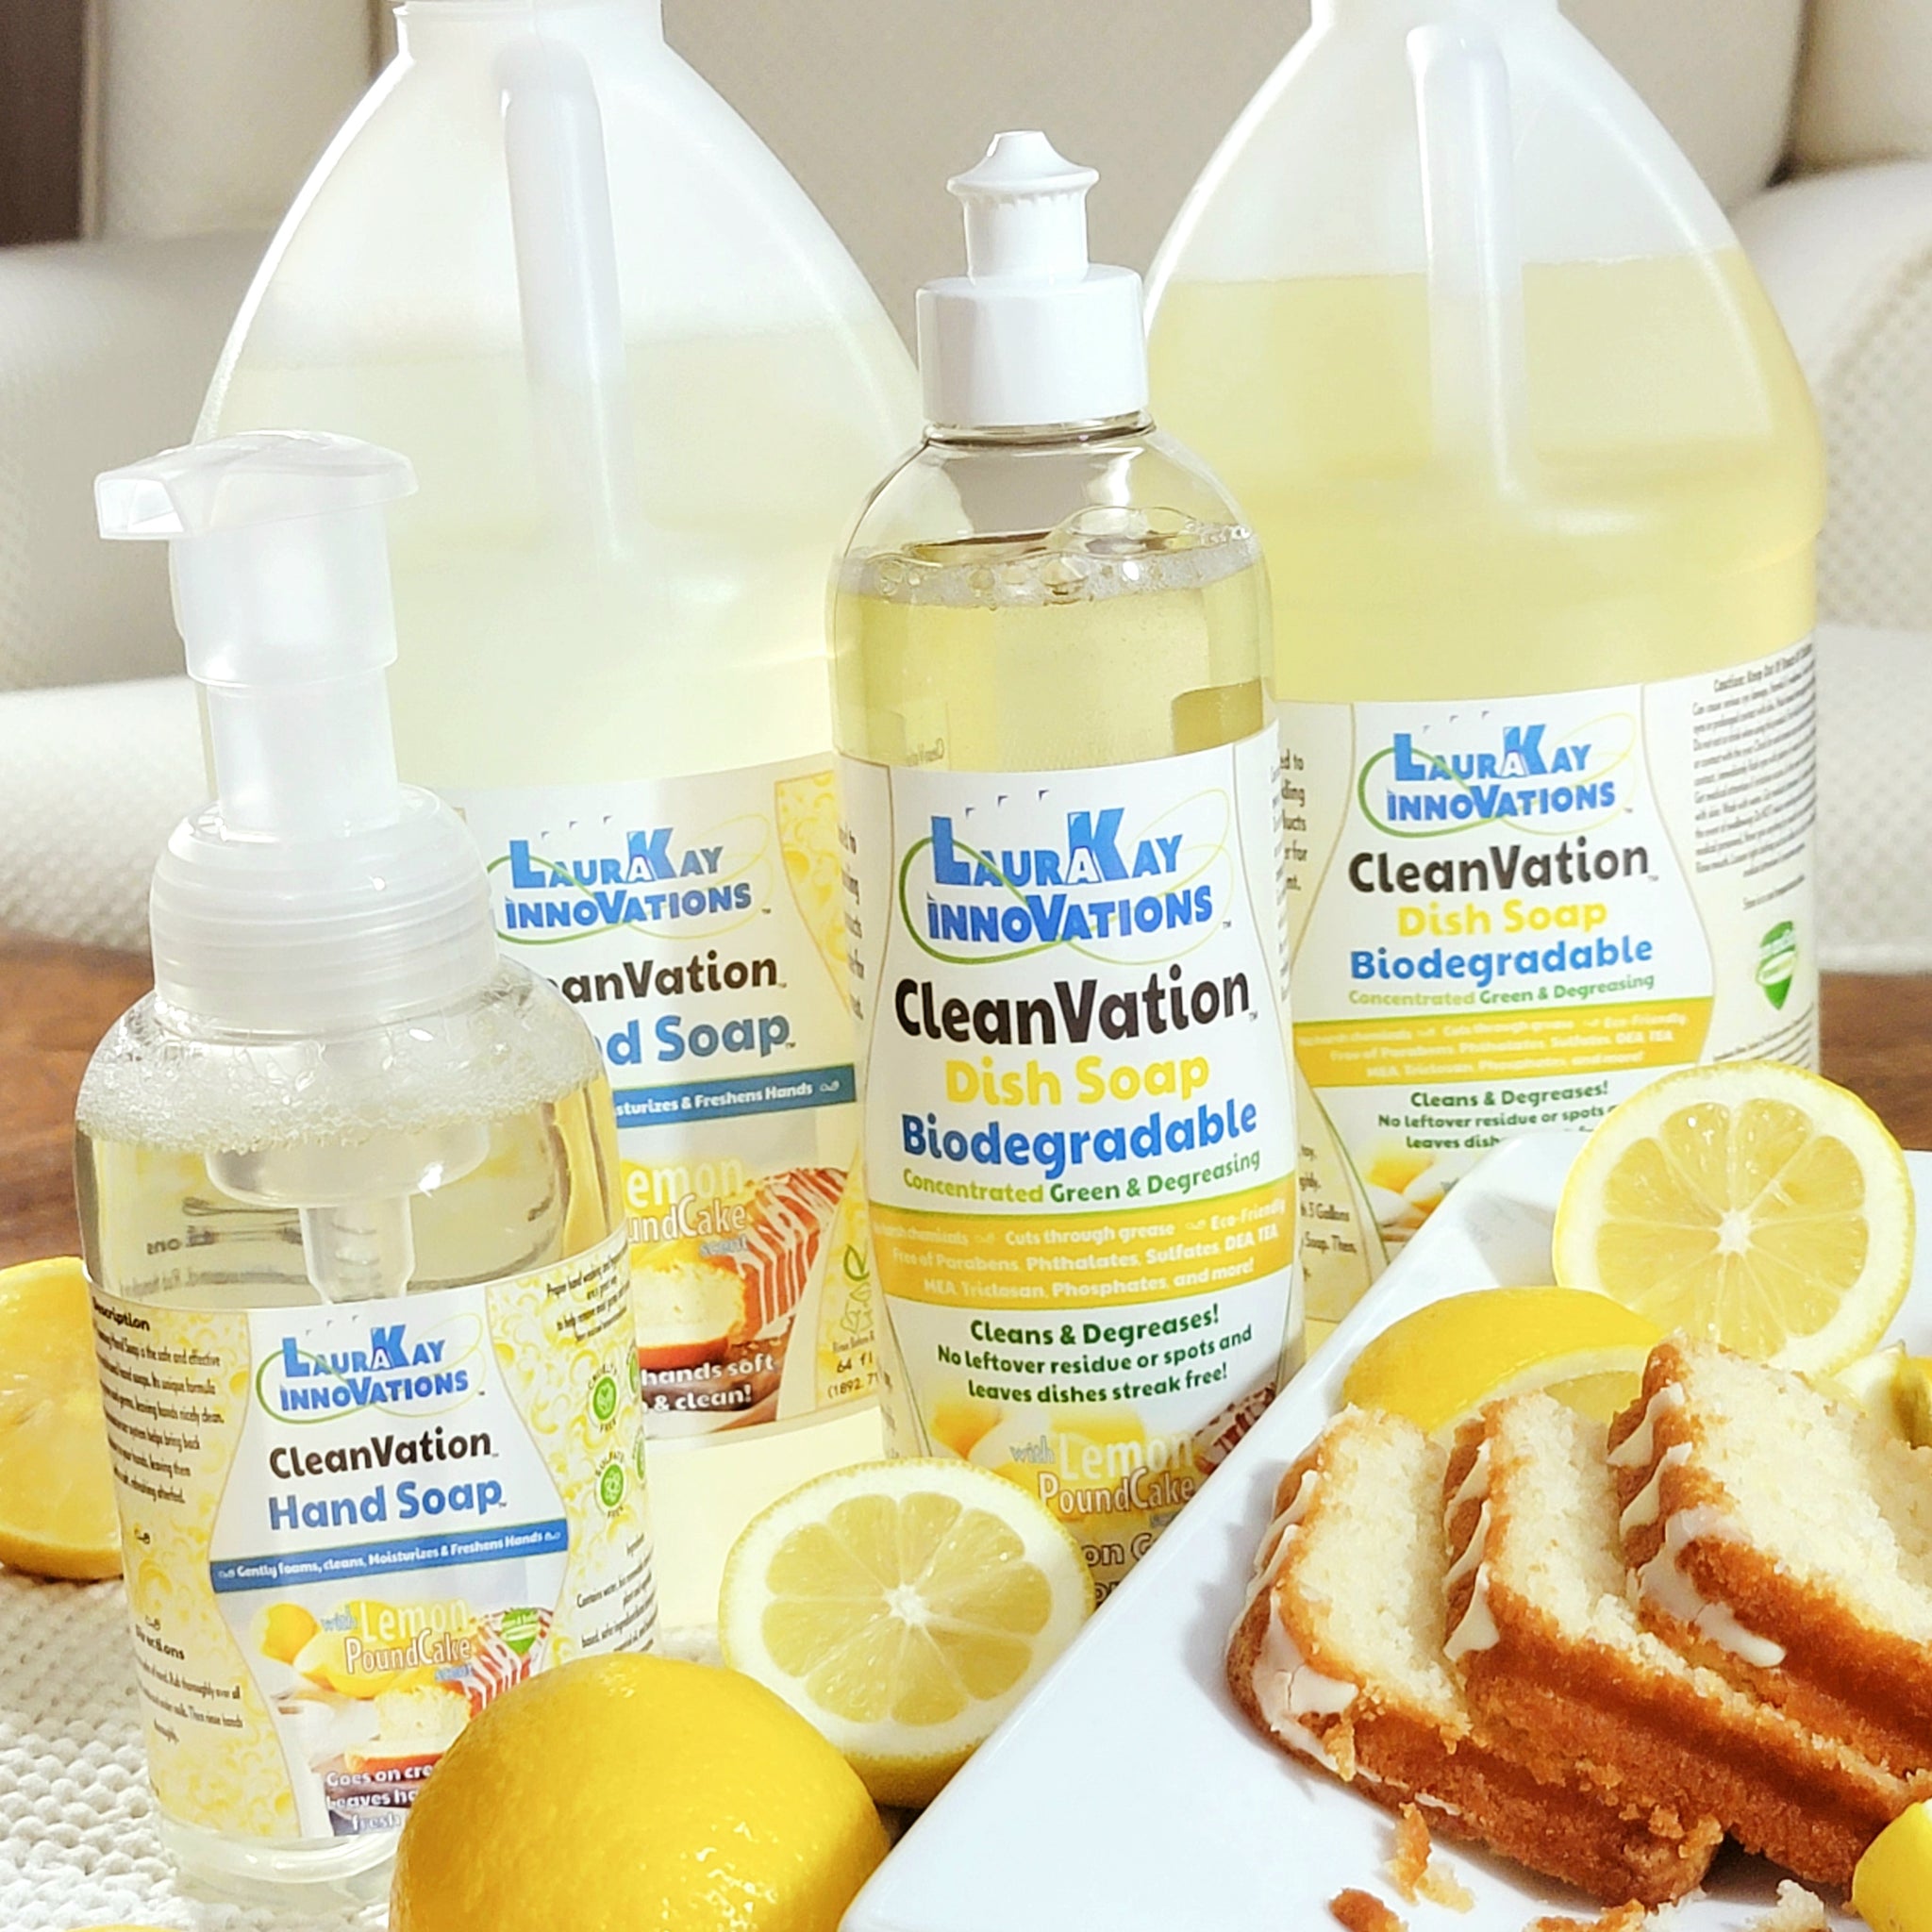 Made with 100% Natural Lemon Essential Oil